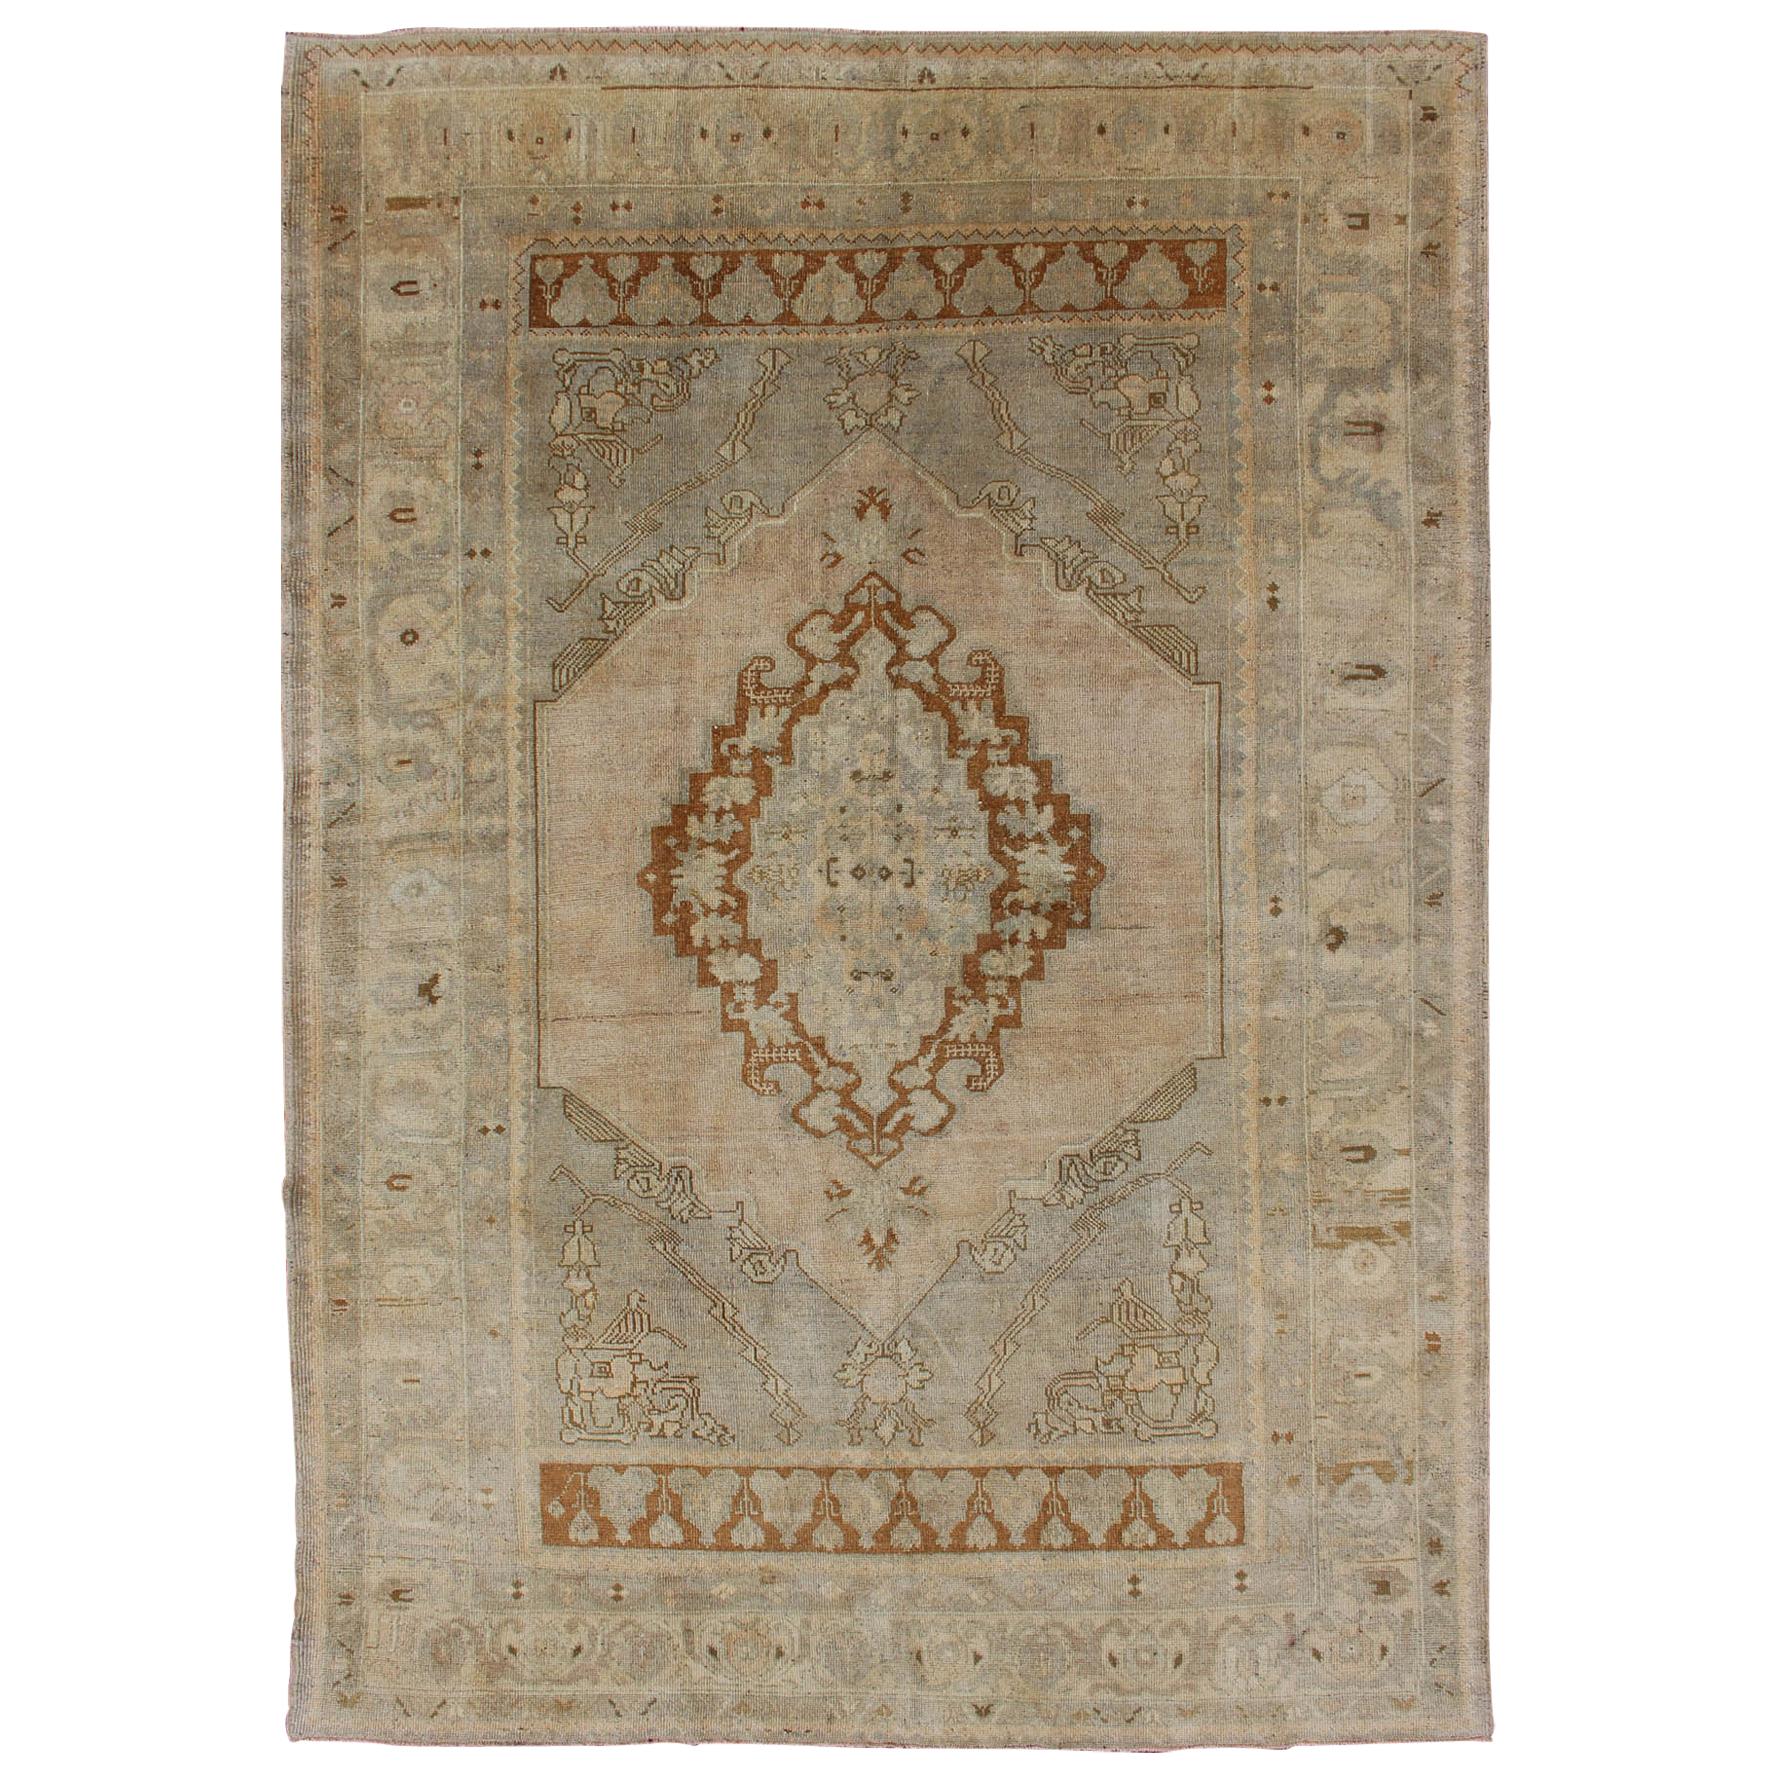 Unique Turkish Oushak Rug with Muted Colors in Taupe, Gray, Ice Blue and L.Green